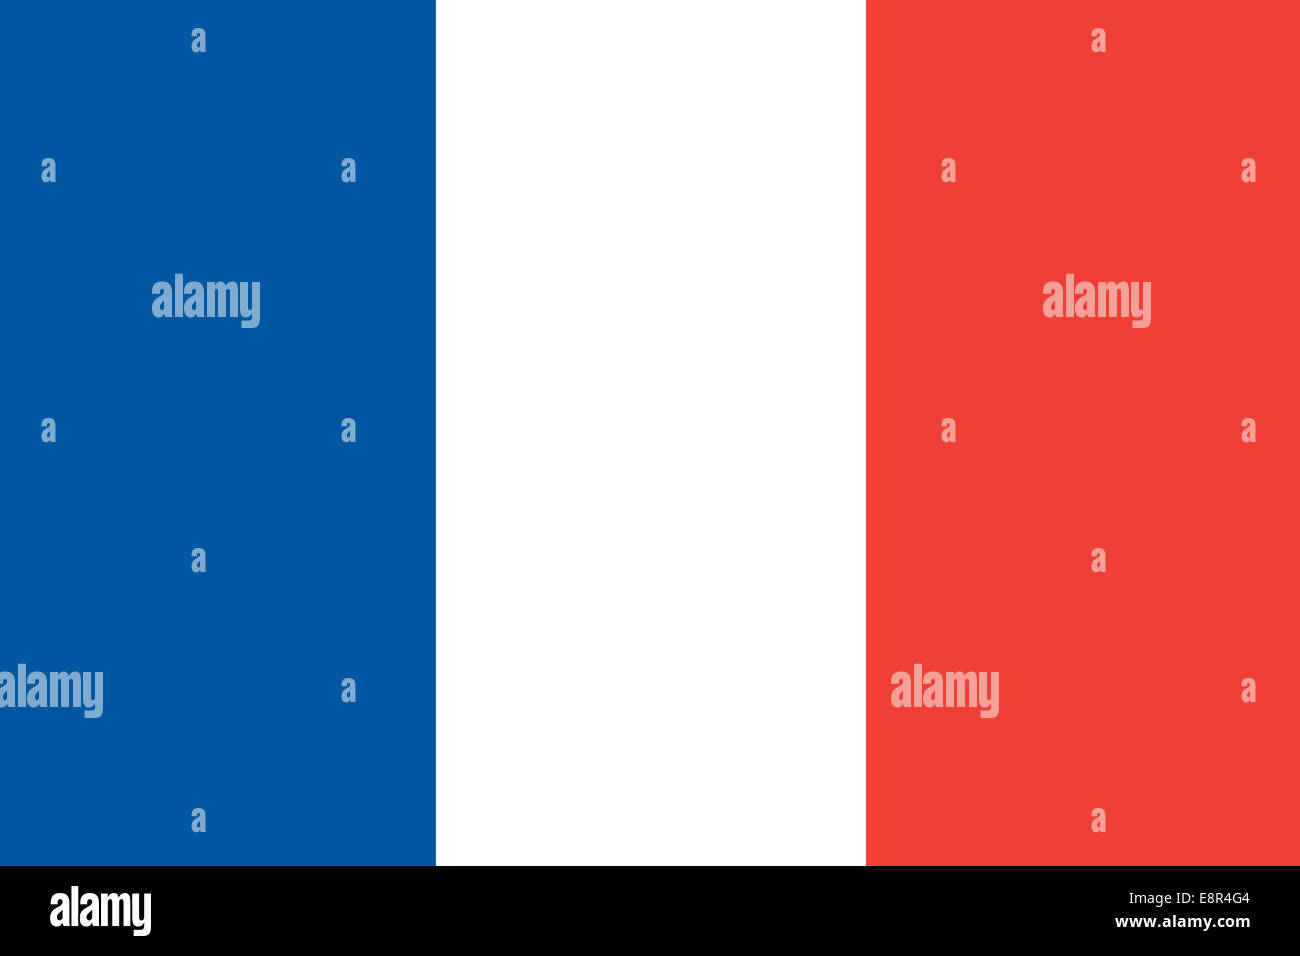 Flag of France - French flag standard ratio - true RGB color mode Stock Photo